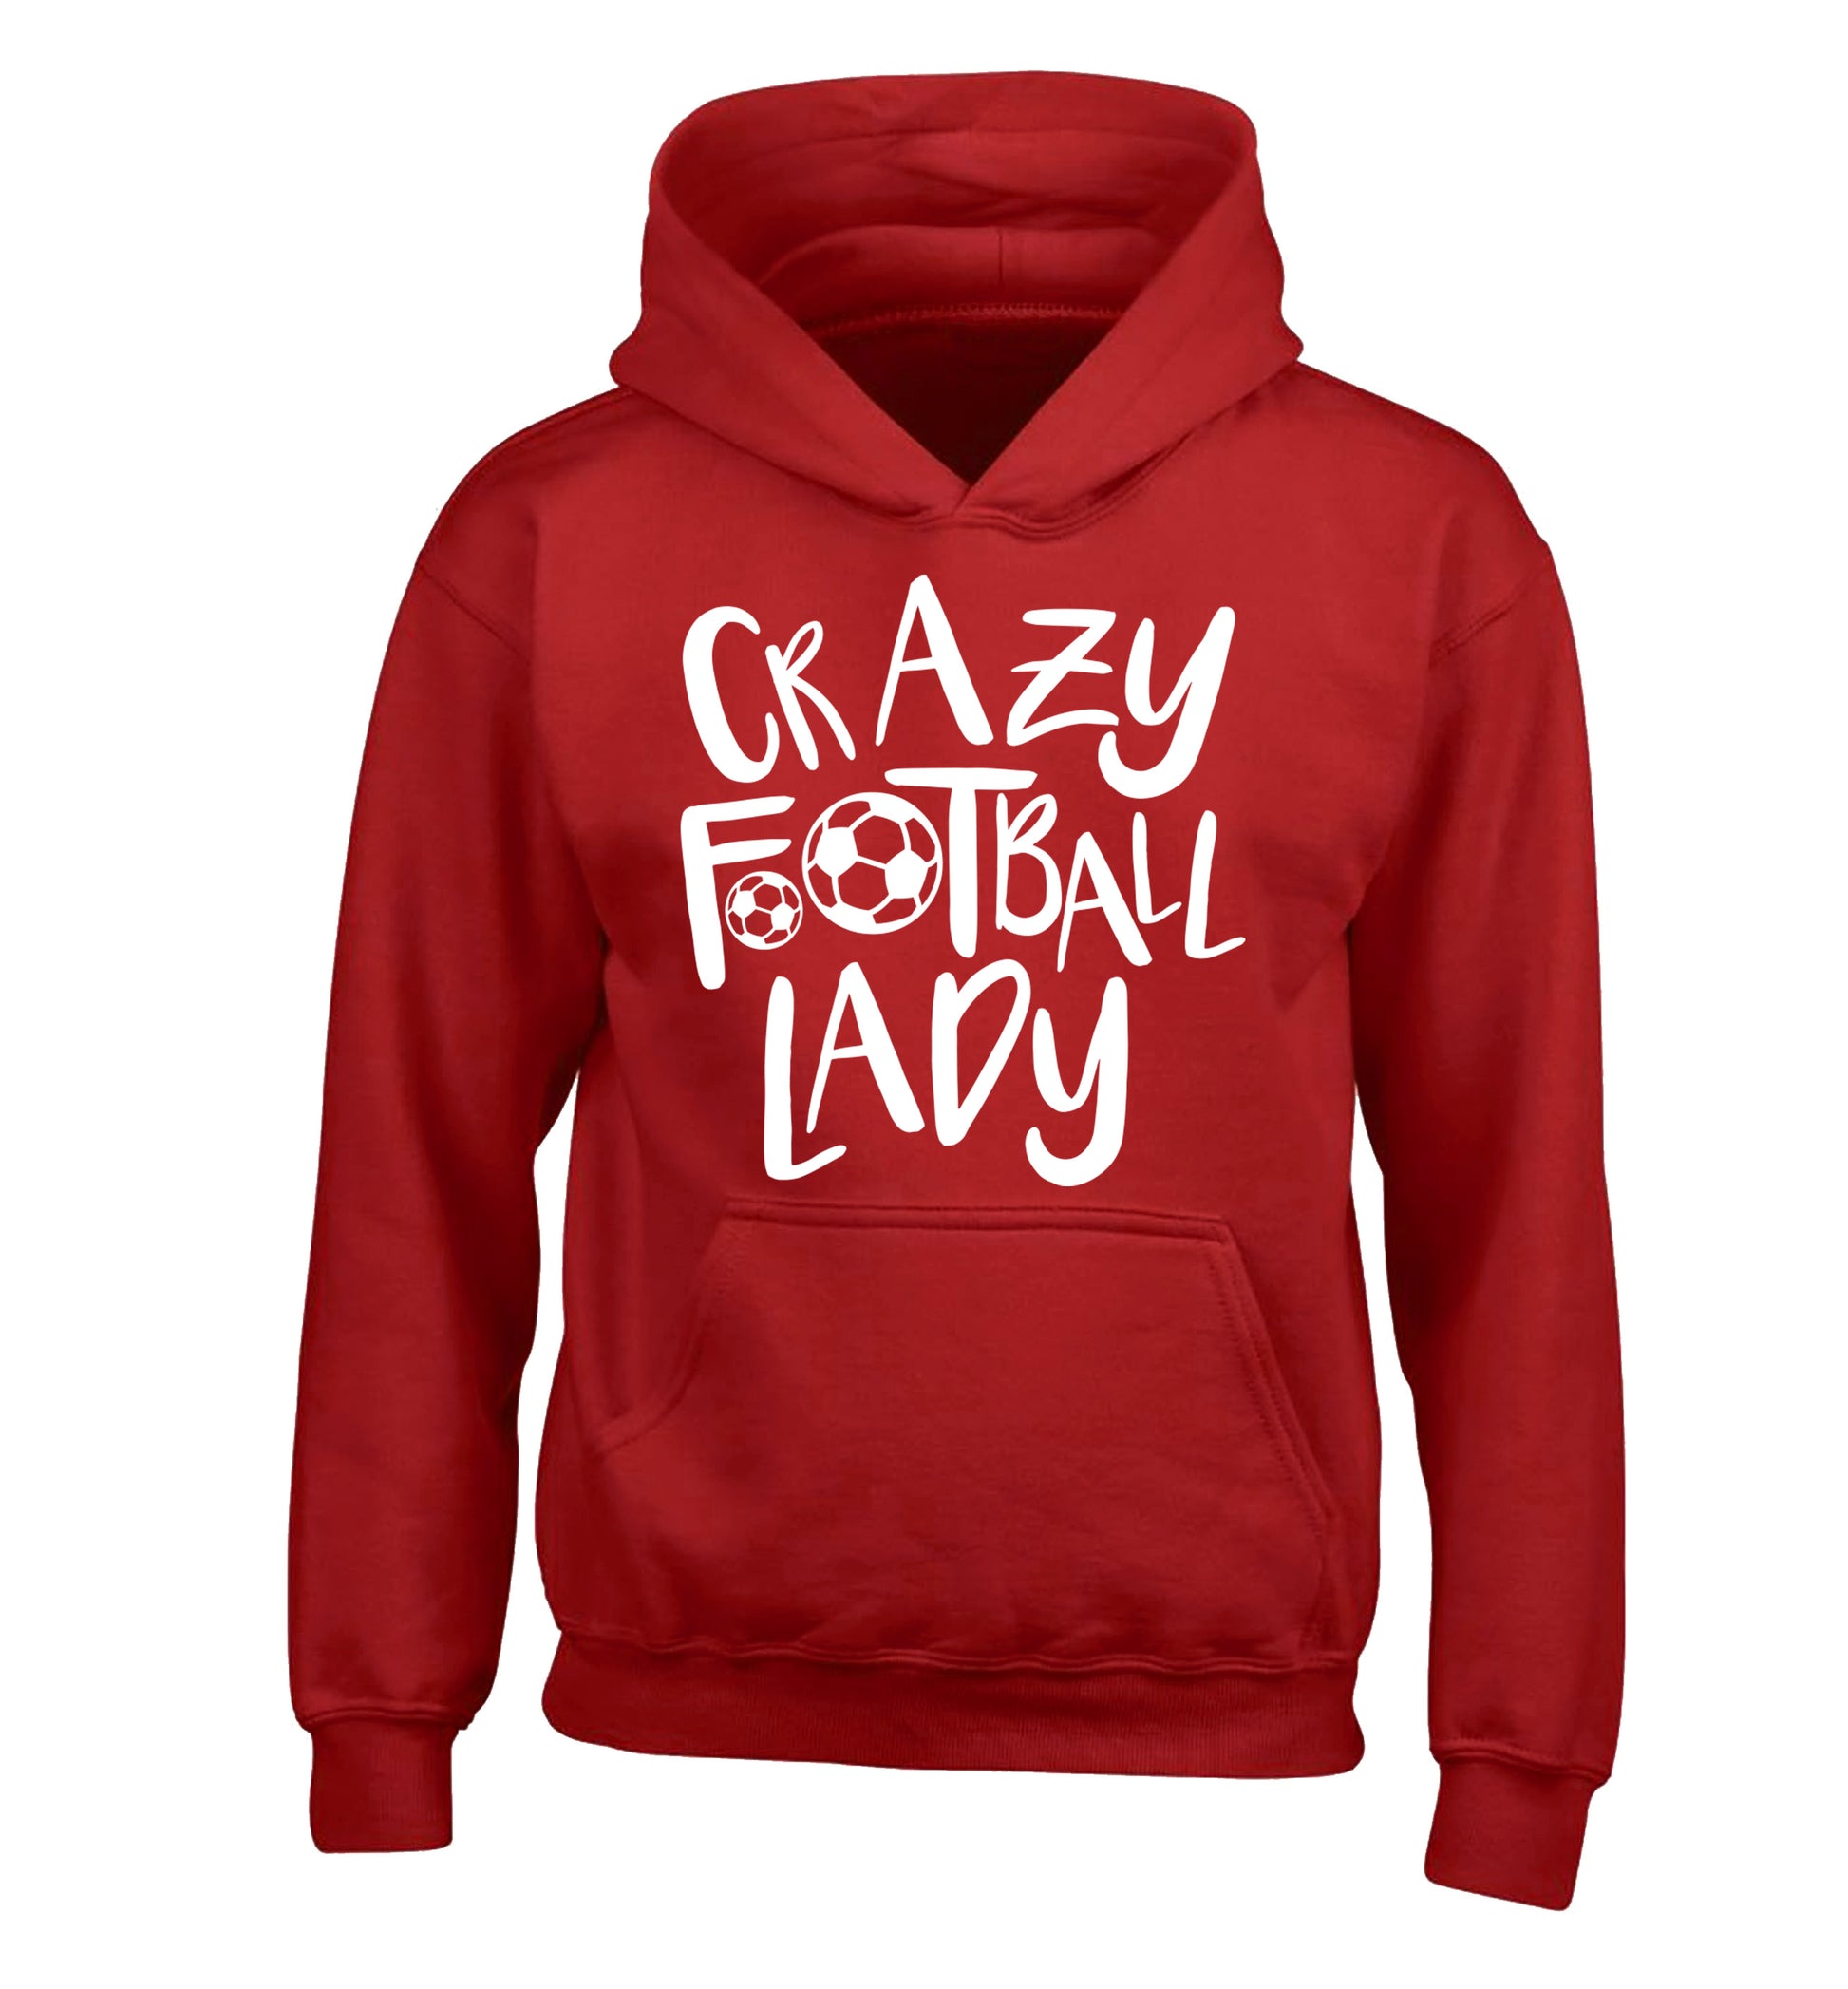 Crazy football lady children's red hoodie 12-14 Years